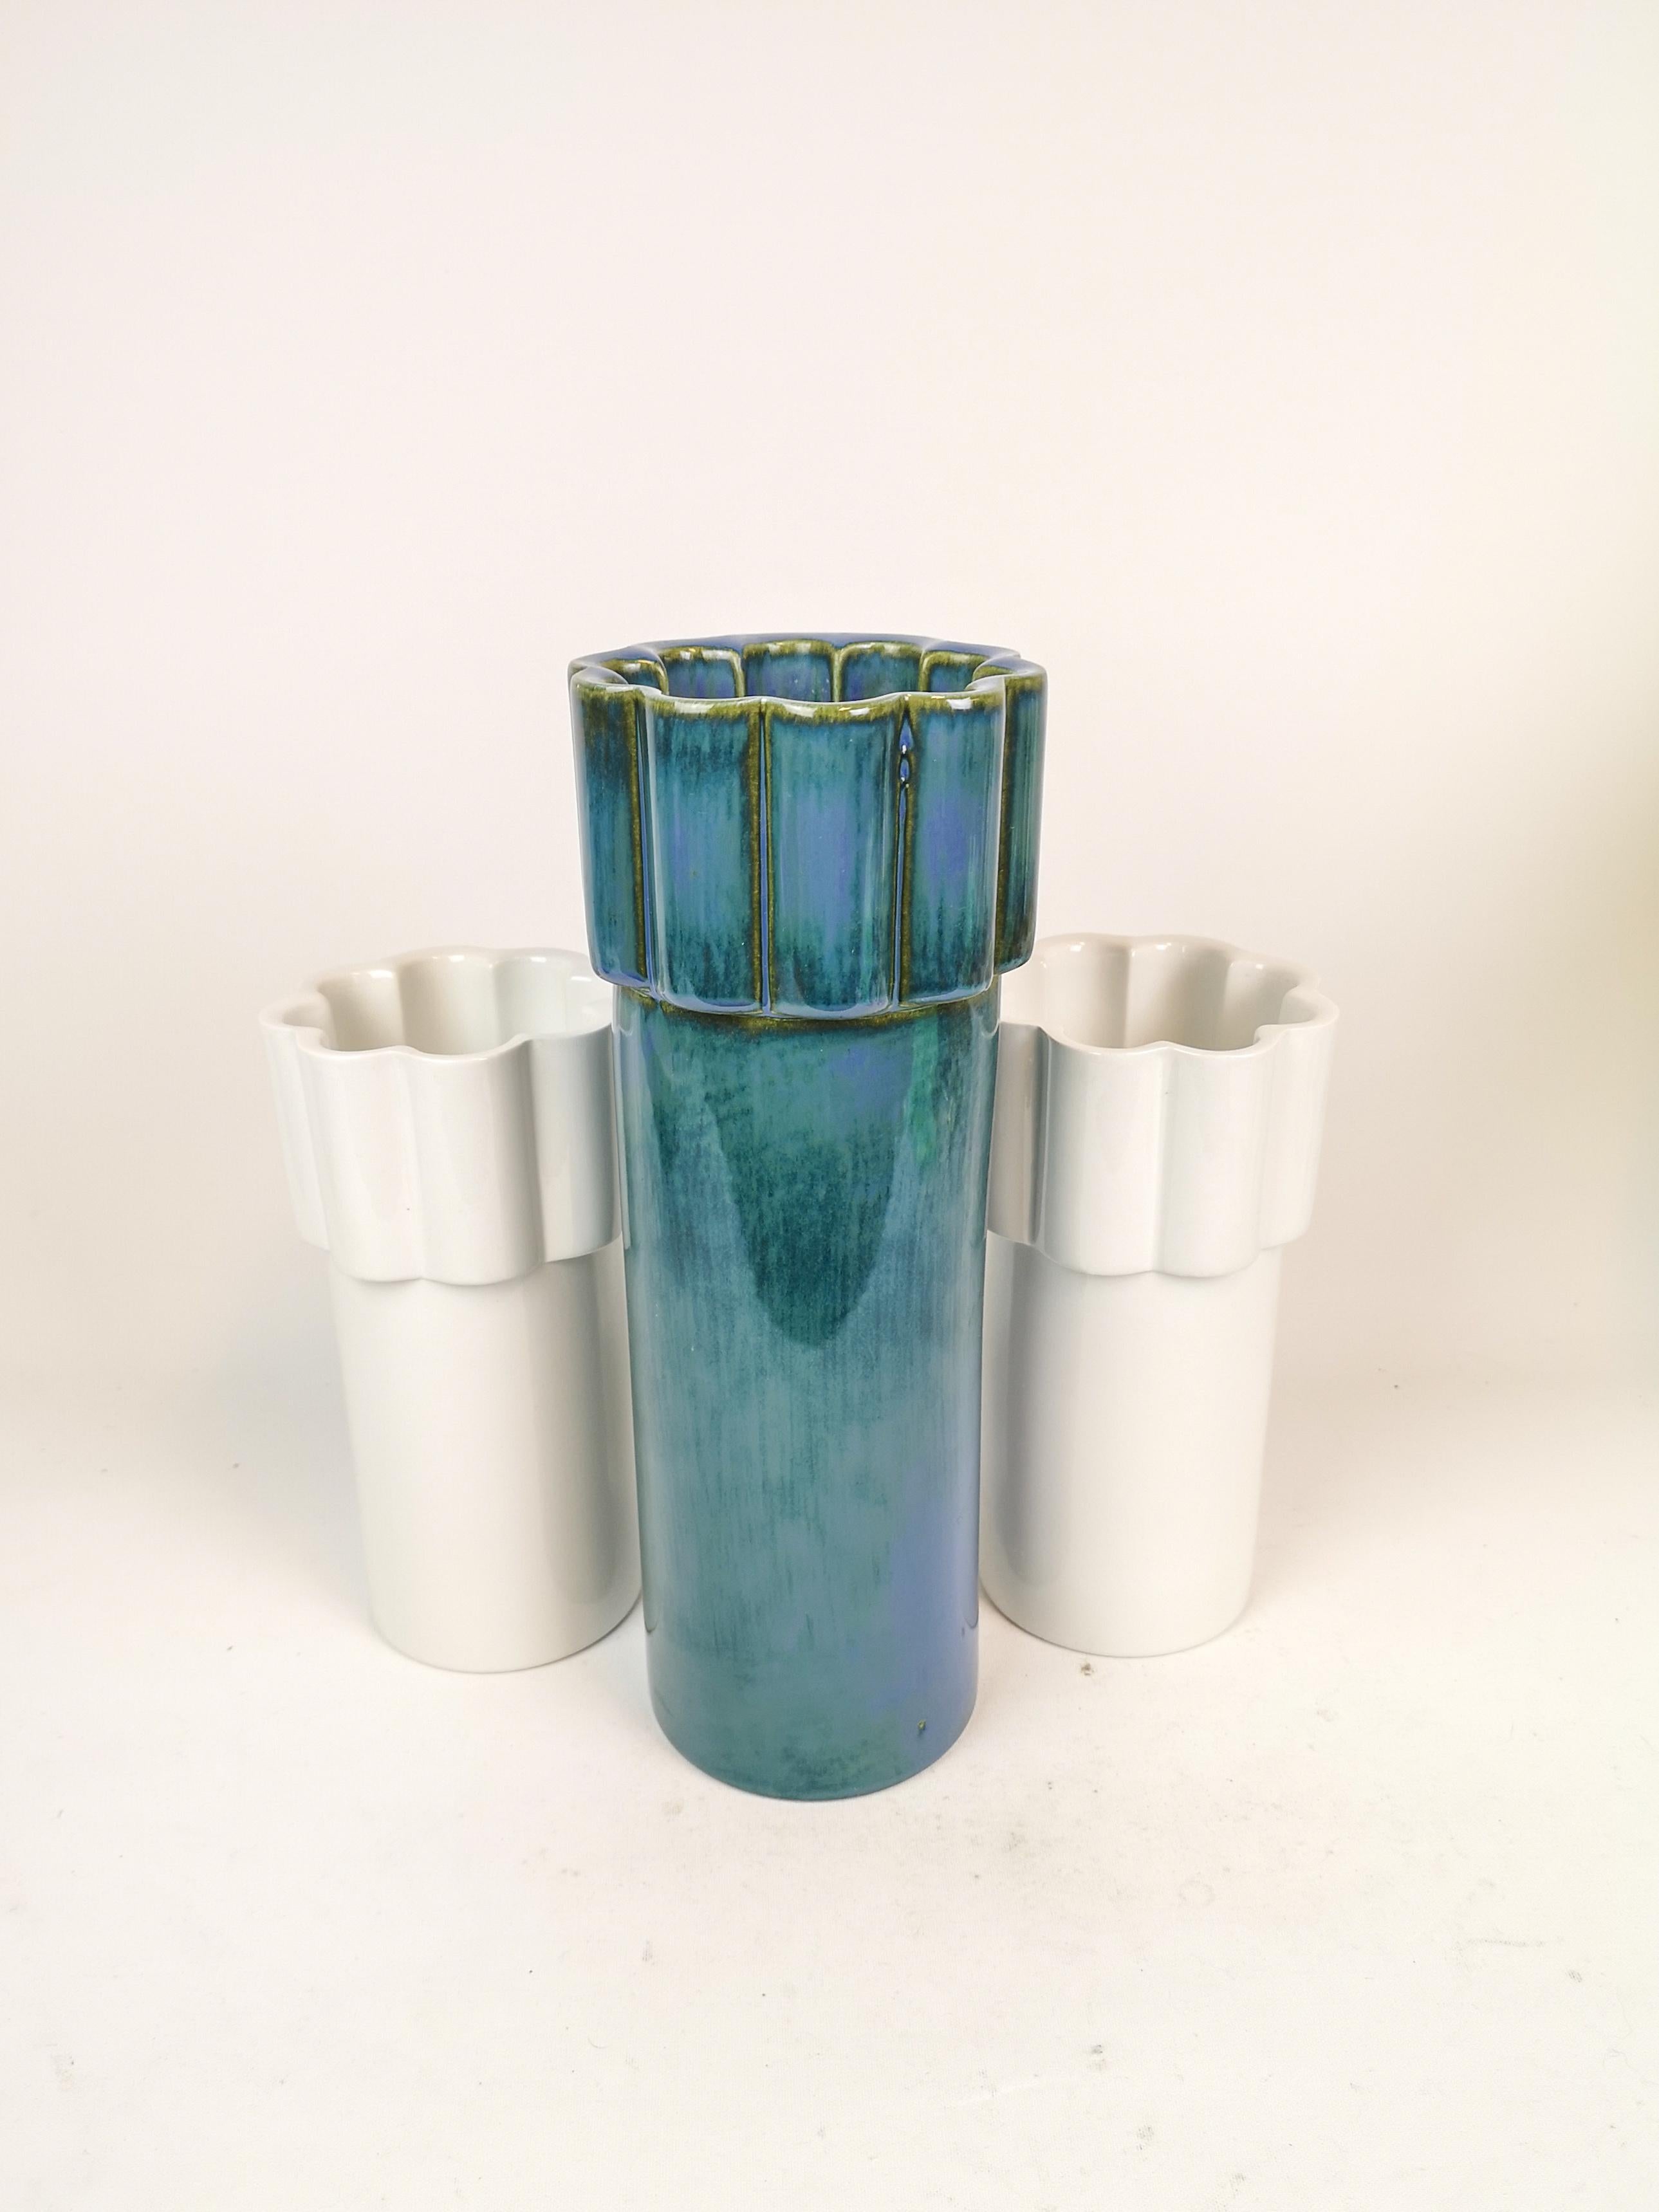 Three wonderful vases, manufactured by Gustavsberg Sweden in the 1960s, designed by the very talented Karin Björquist. The vases have a beautiful form and the glaze is amazing. The blue green gives a nice shine. 

Very good condition.